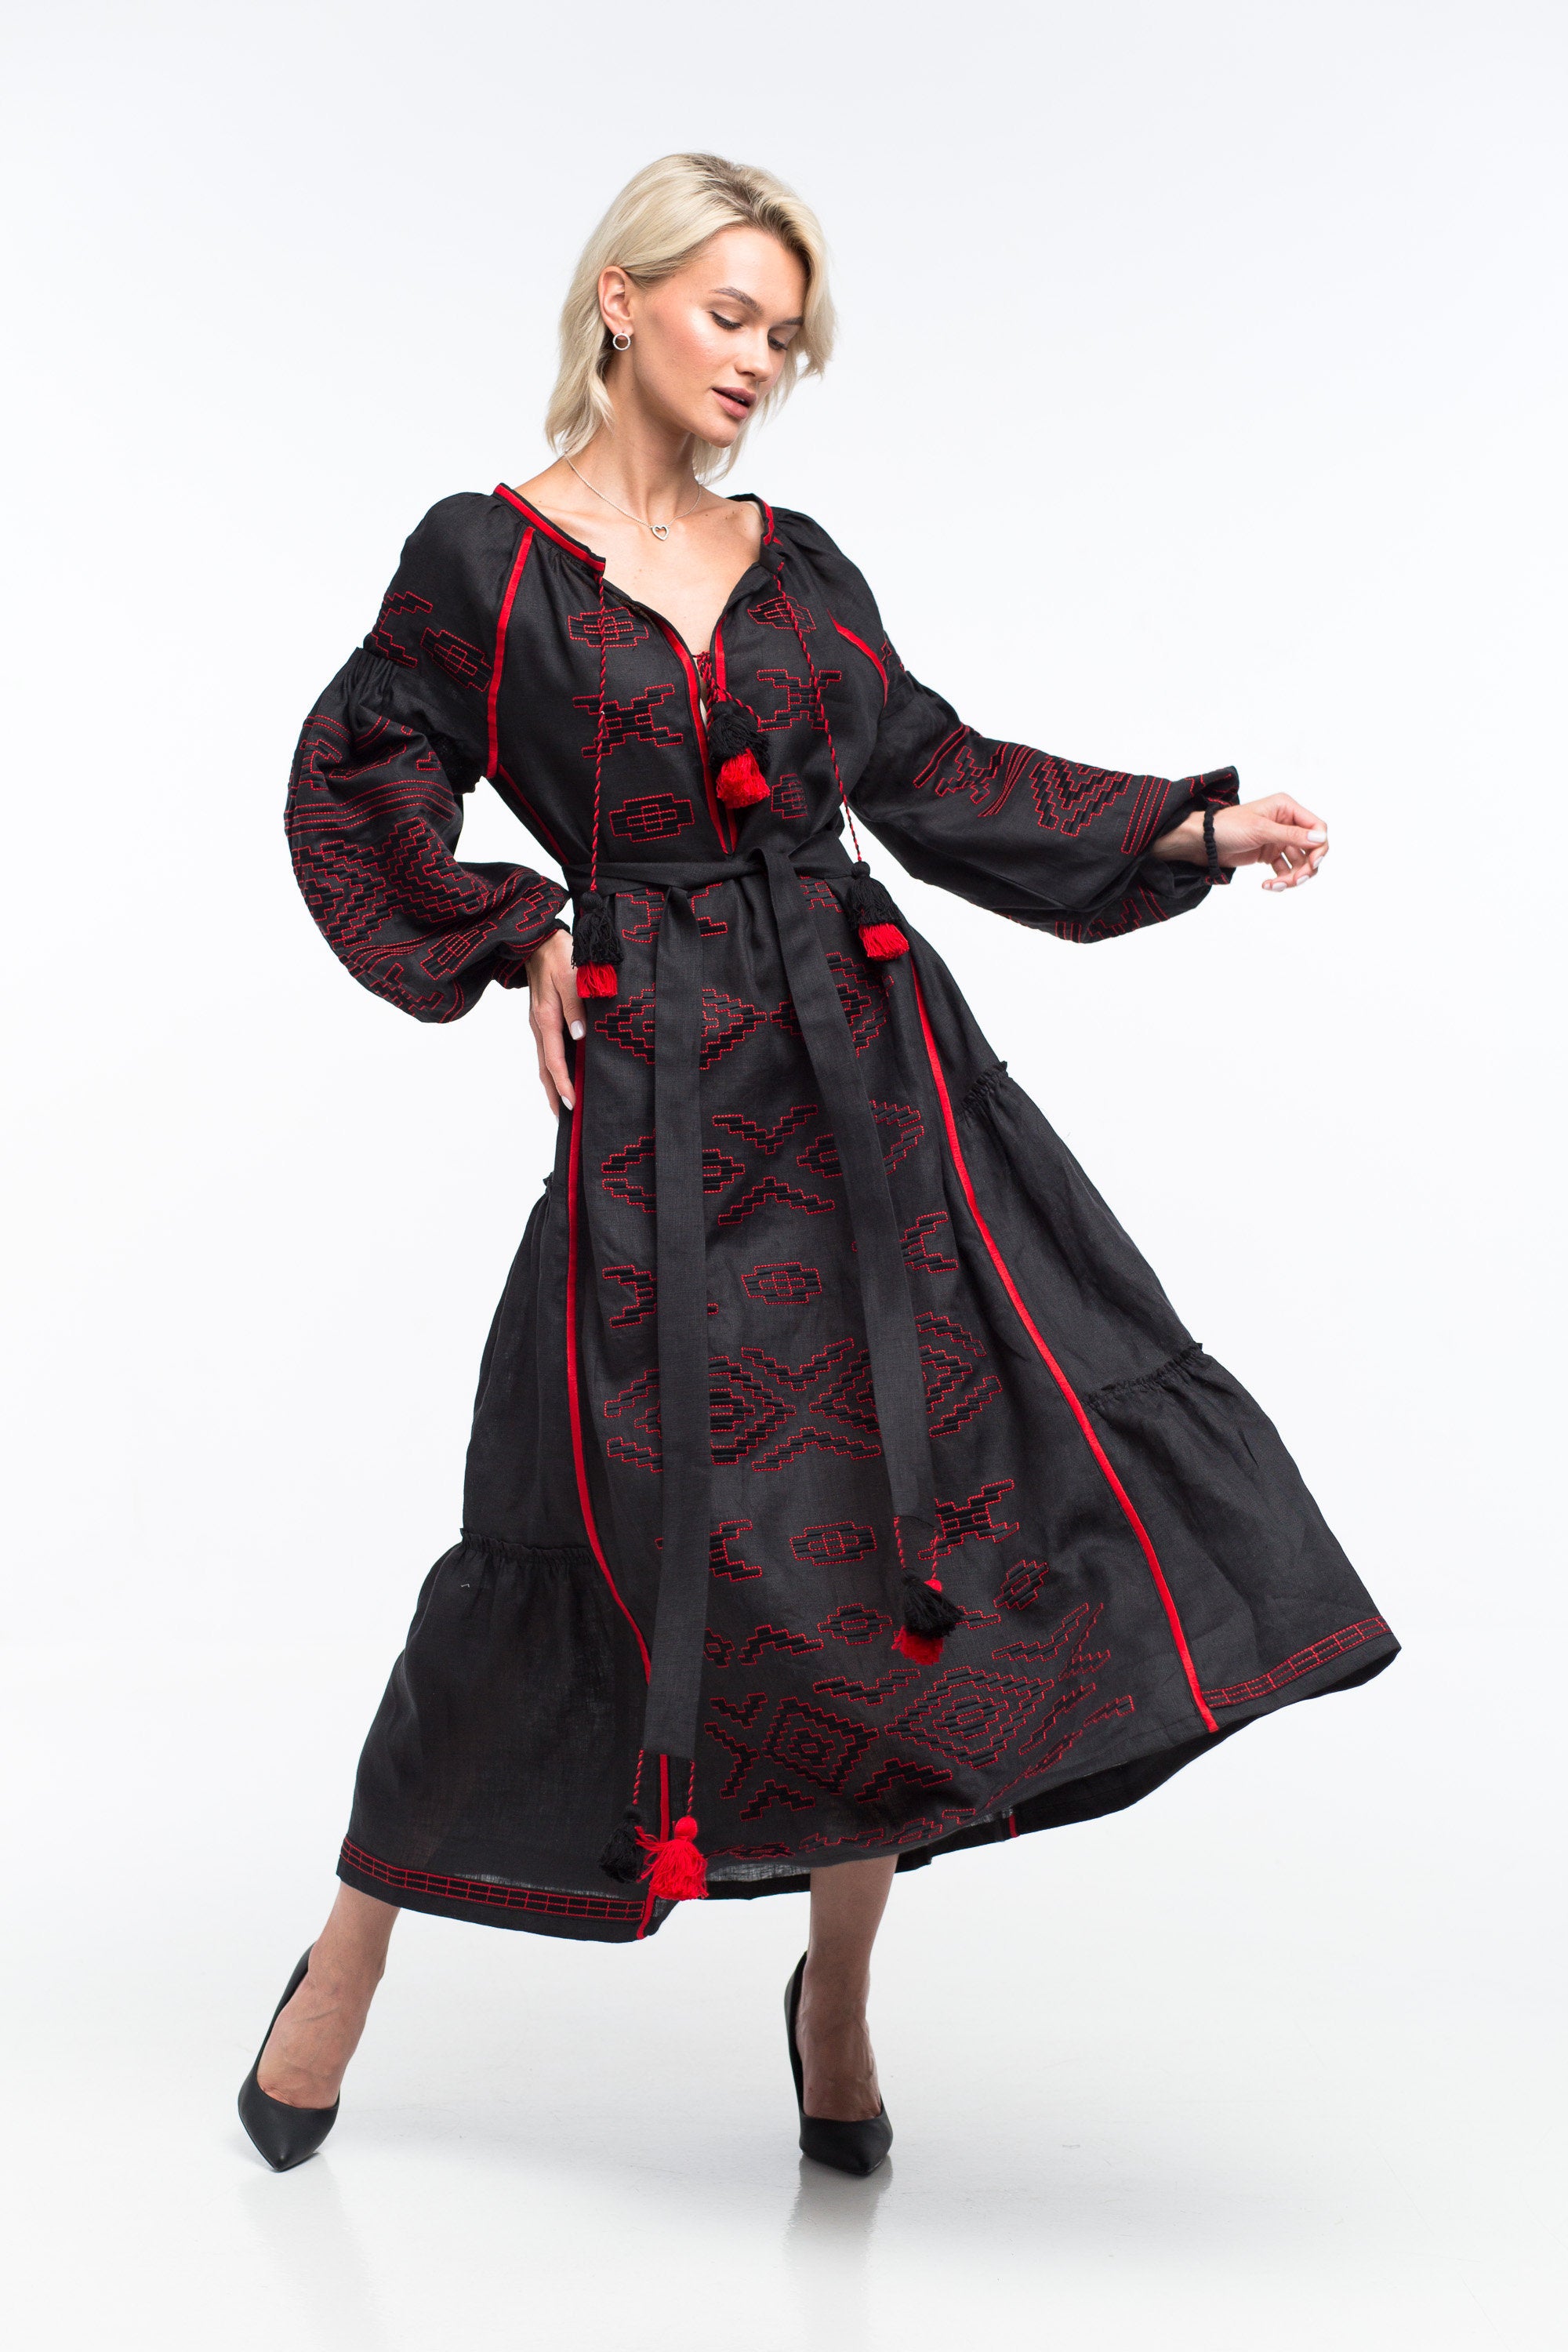 Serena embroidered dress Fashion wedding robe with ukrainian ethnic embroidery